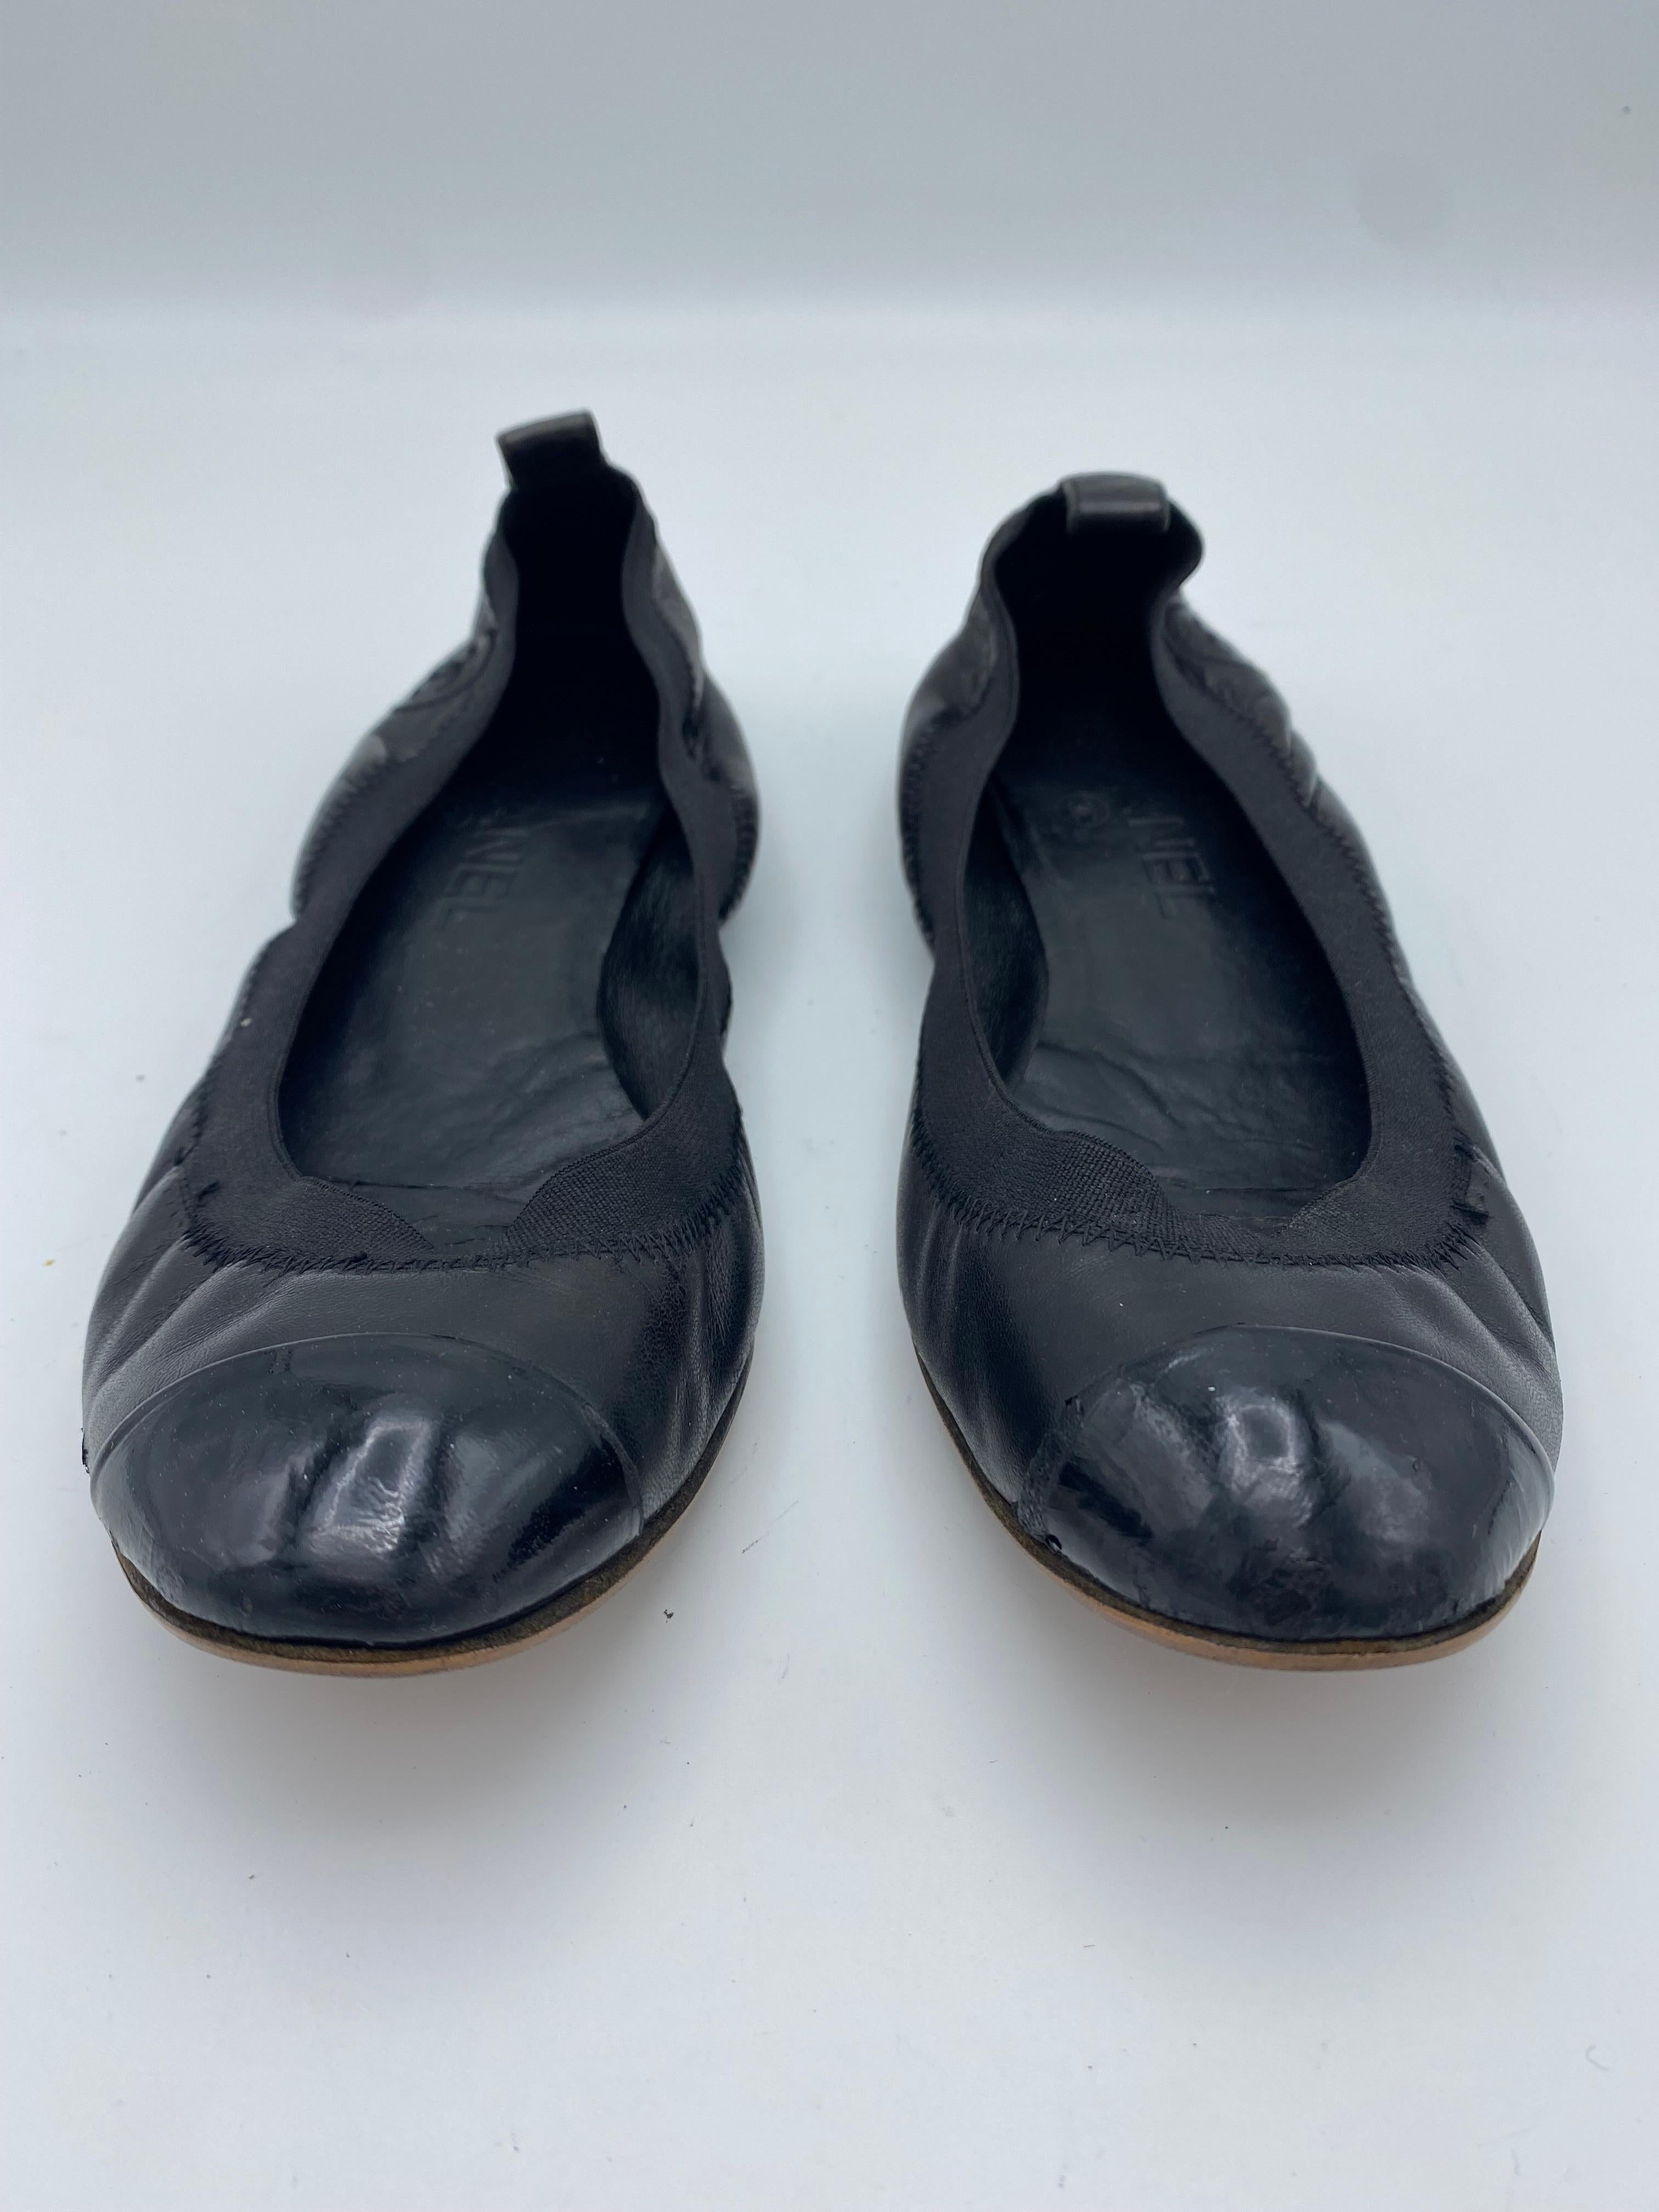 Product details:

The flats feature black leather with black elastic around the foot and CC stitched on the outside of each foot, 